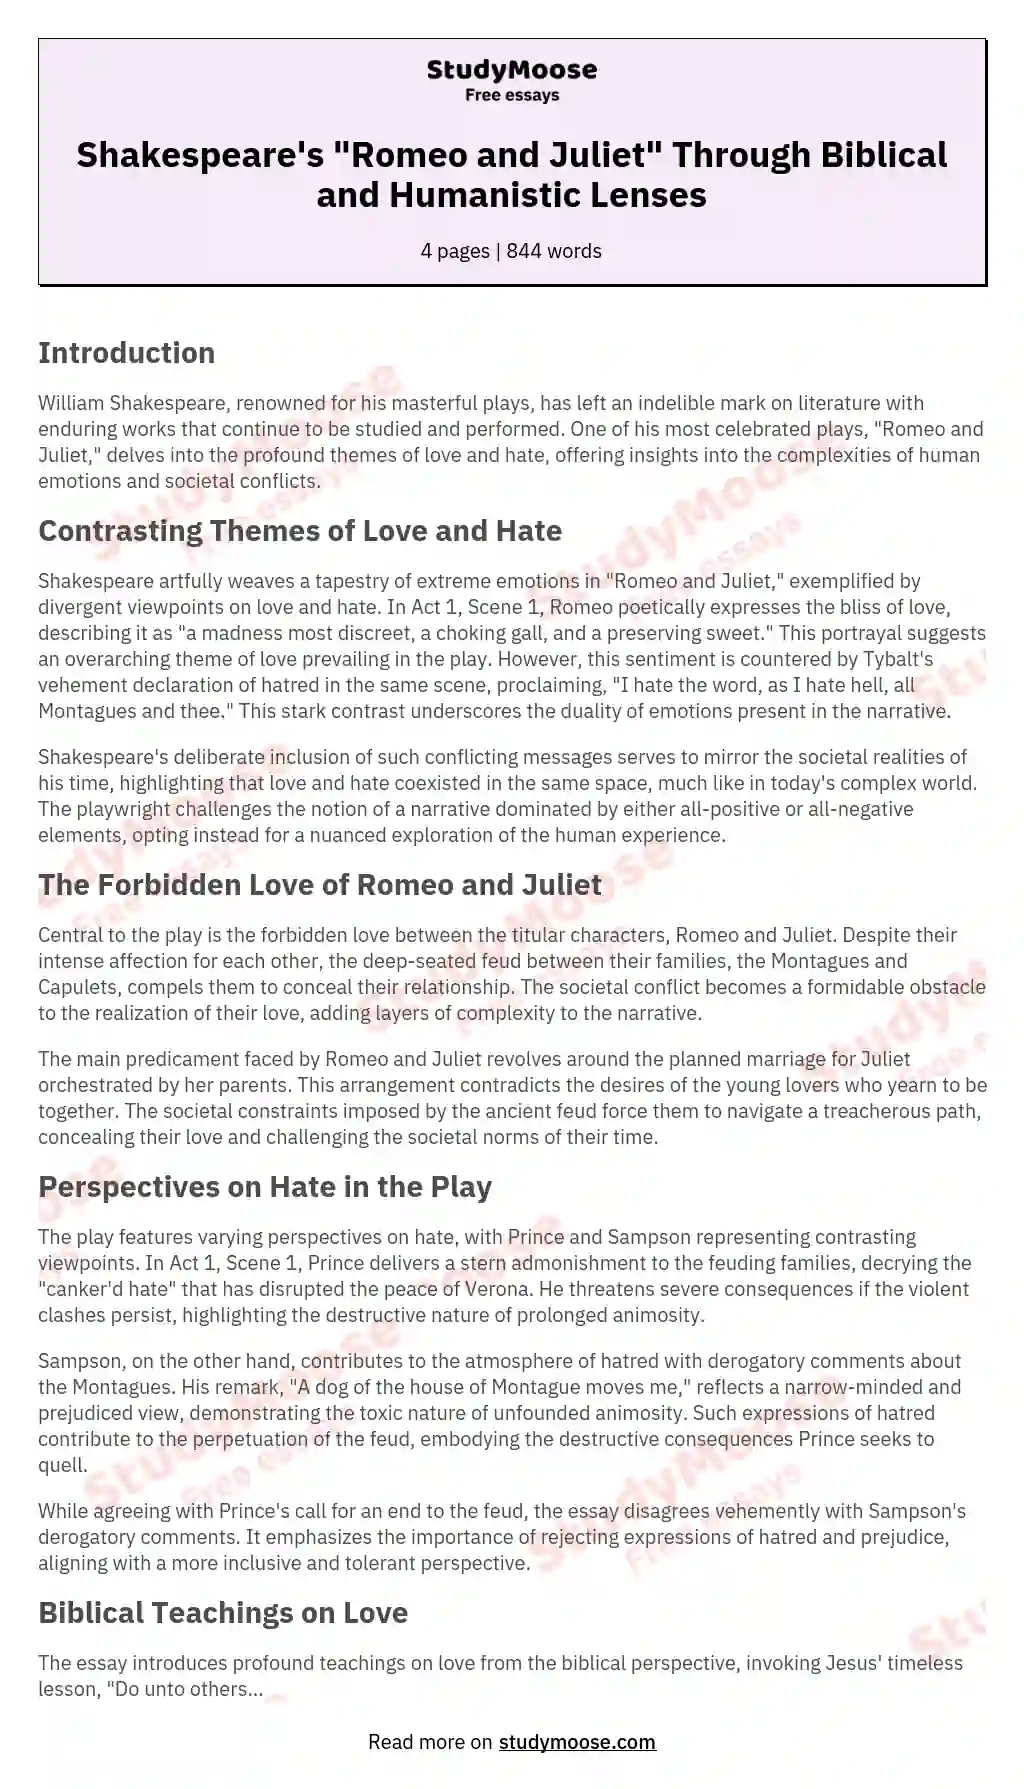 Shakespeare's "Romeo and Juliet" Through Biblical and Humanistic Lenses essay